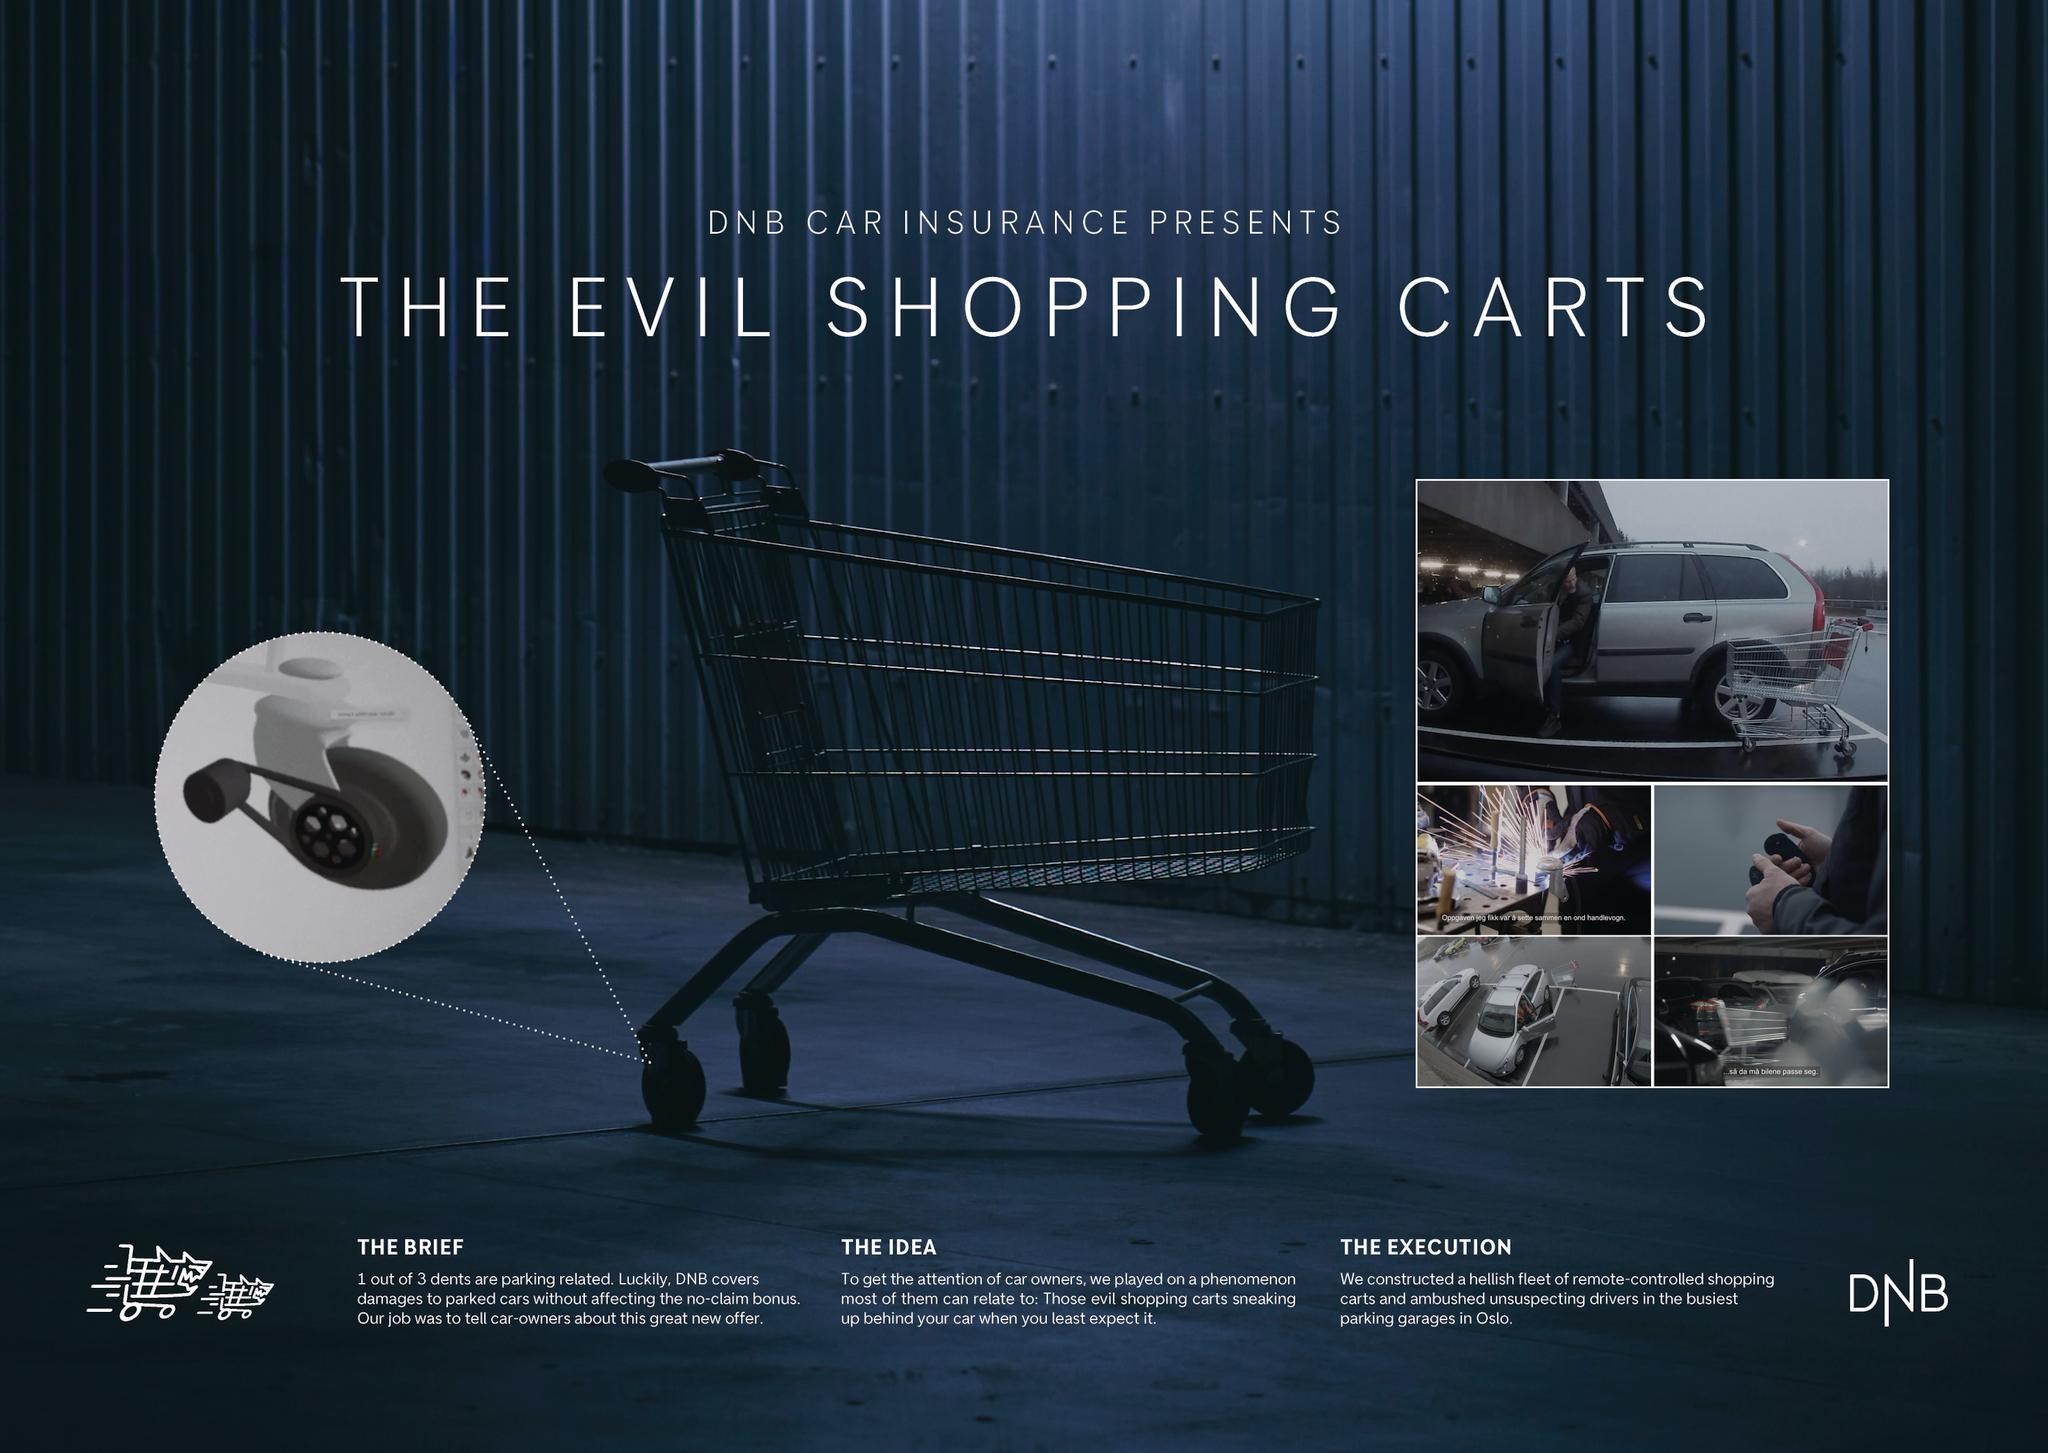 The Evil Shopping Carts